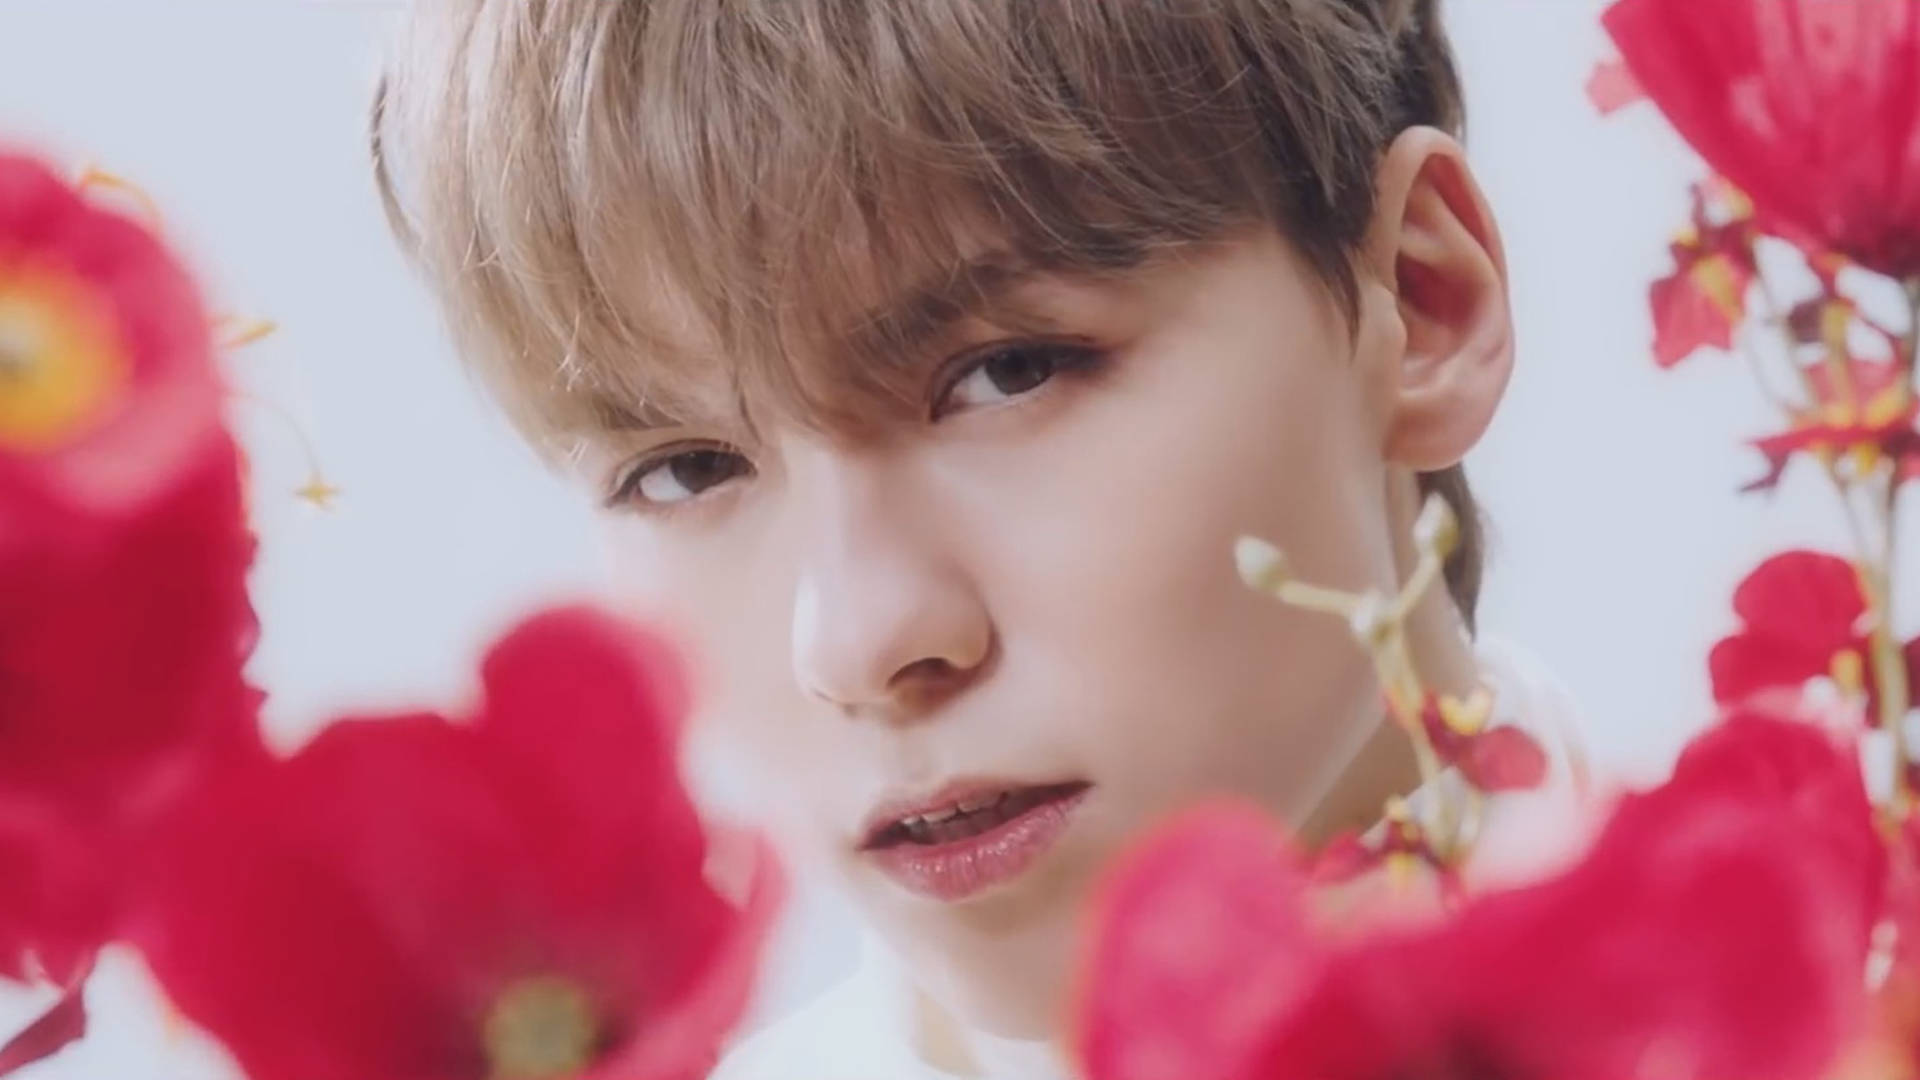 Vernon With Flowers Wallpaper